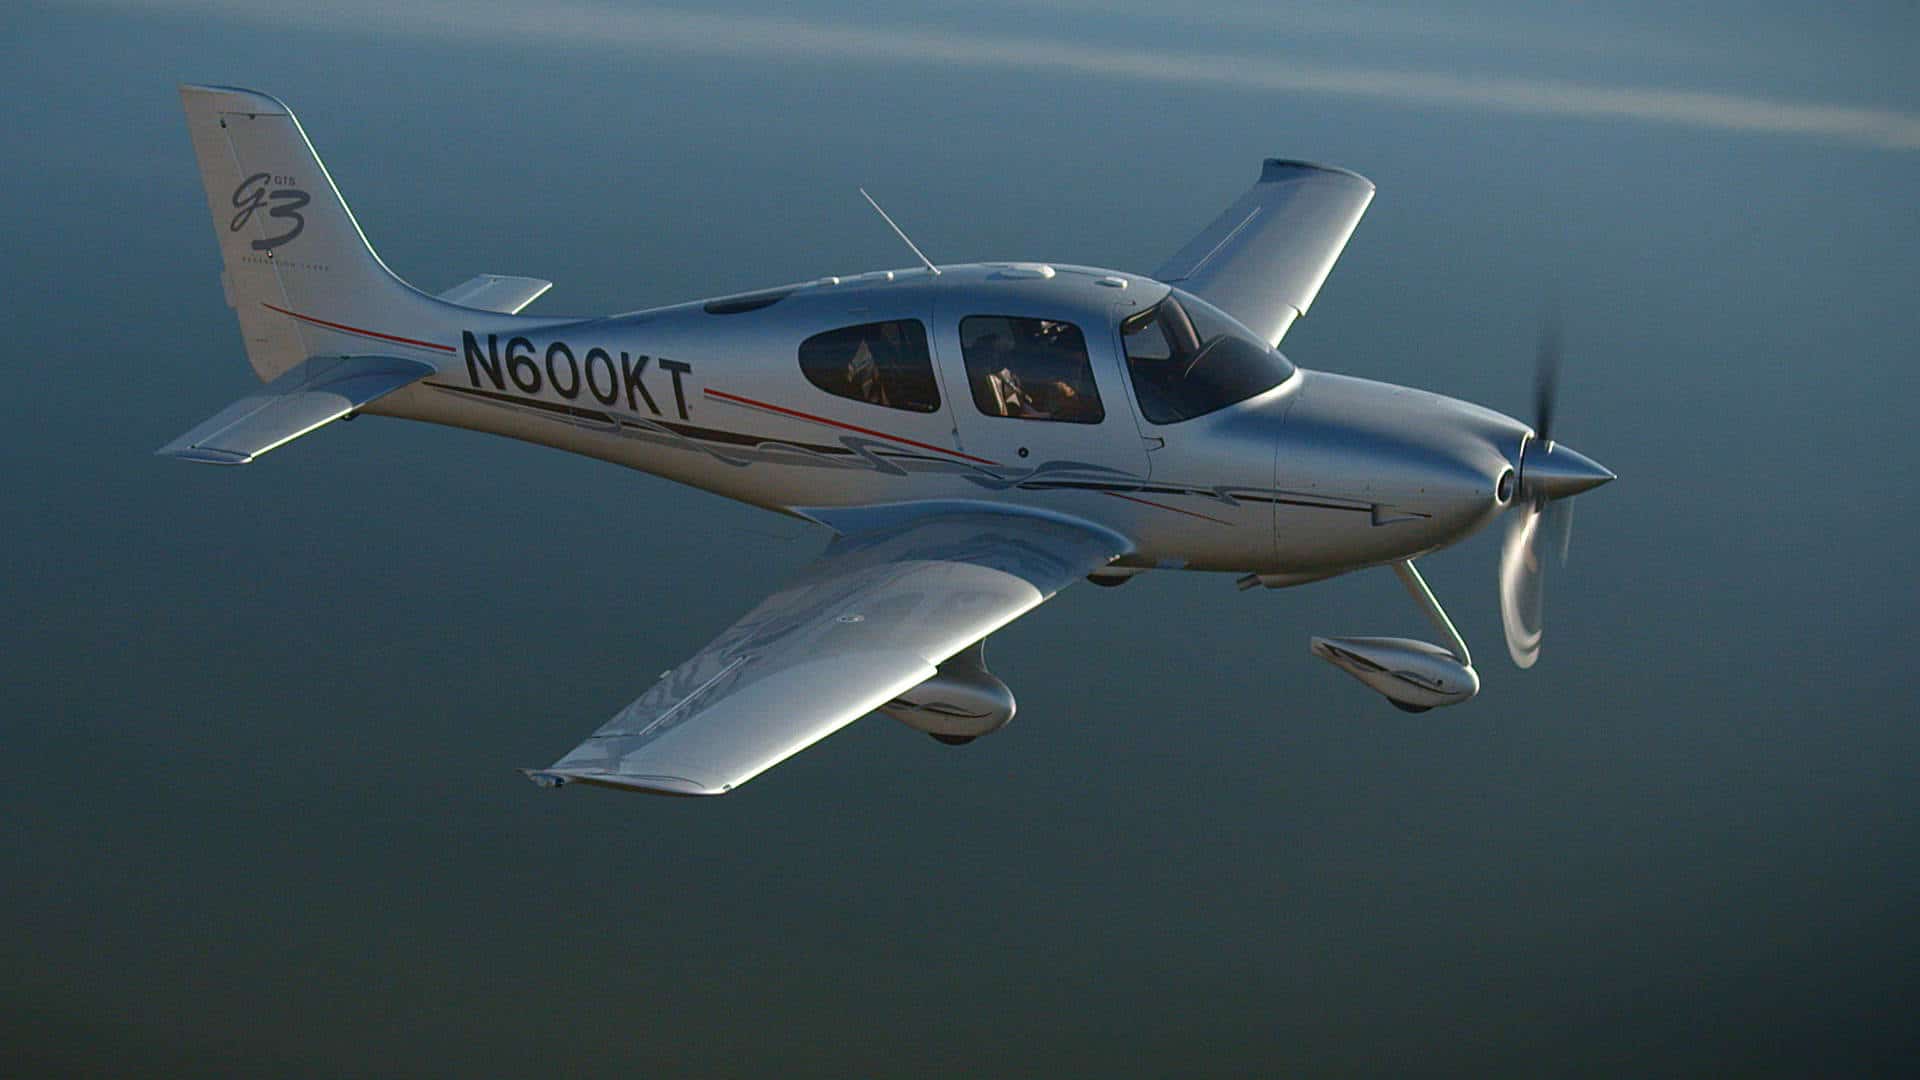 Cirrus SR22: The Plane with the Parachute